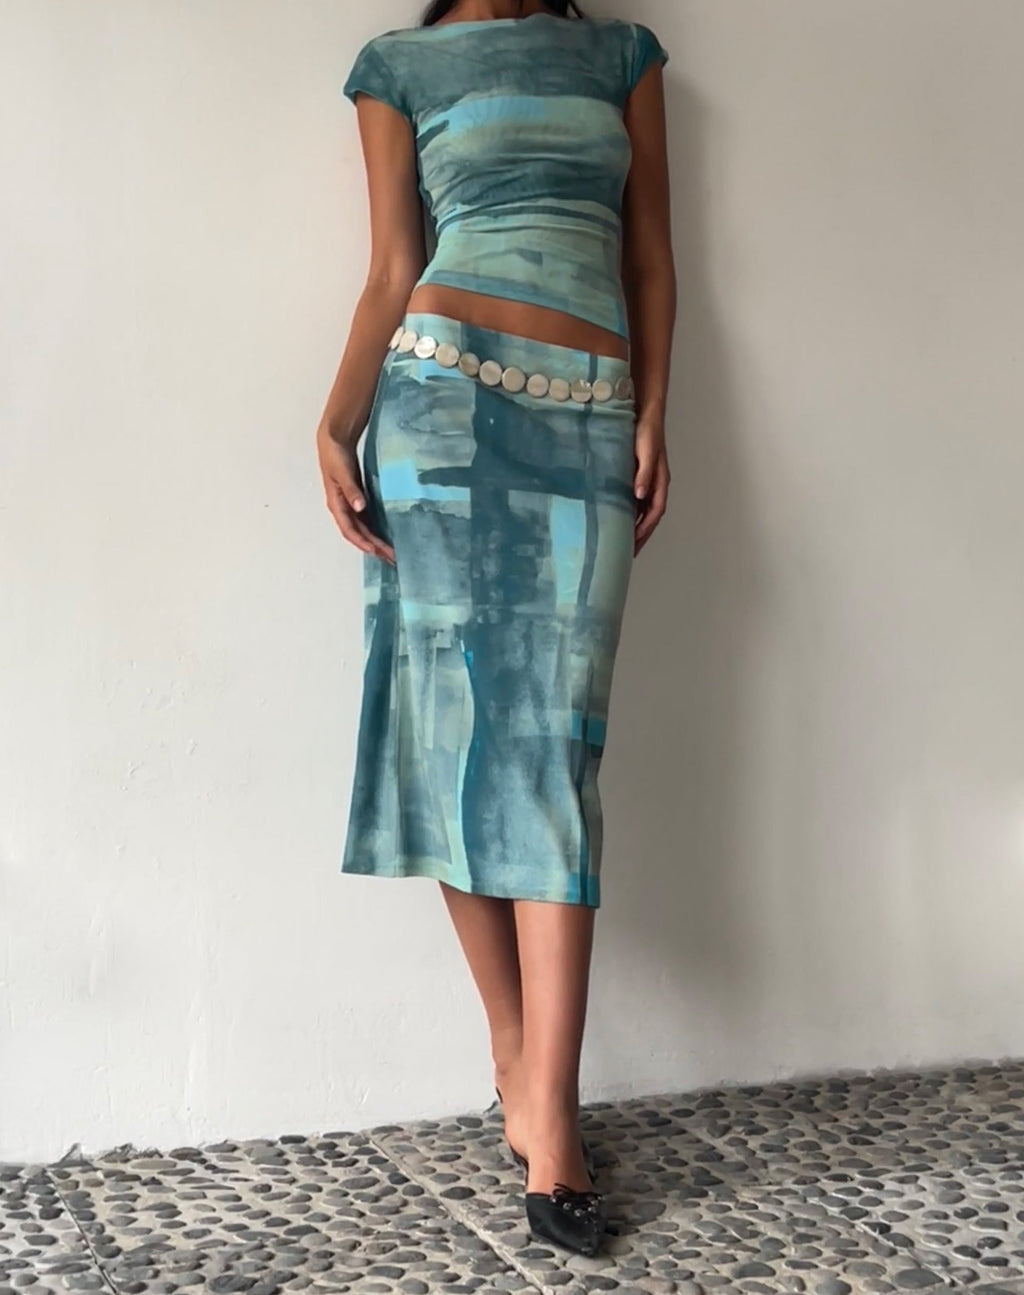 MOTEL X JACQUIE Gia Midi Skirt in Mesh Abstract Paint Brush Green